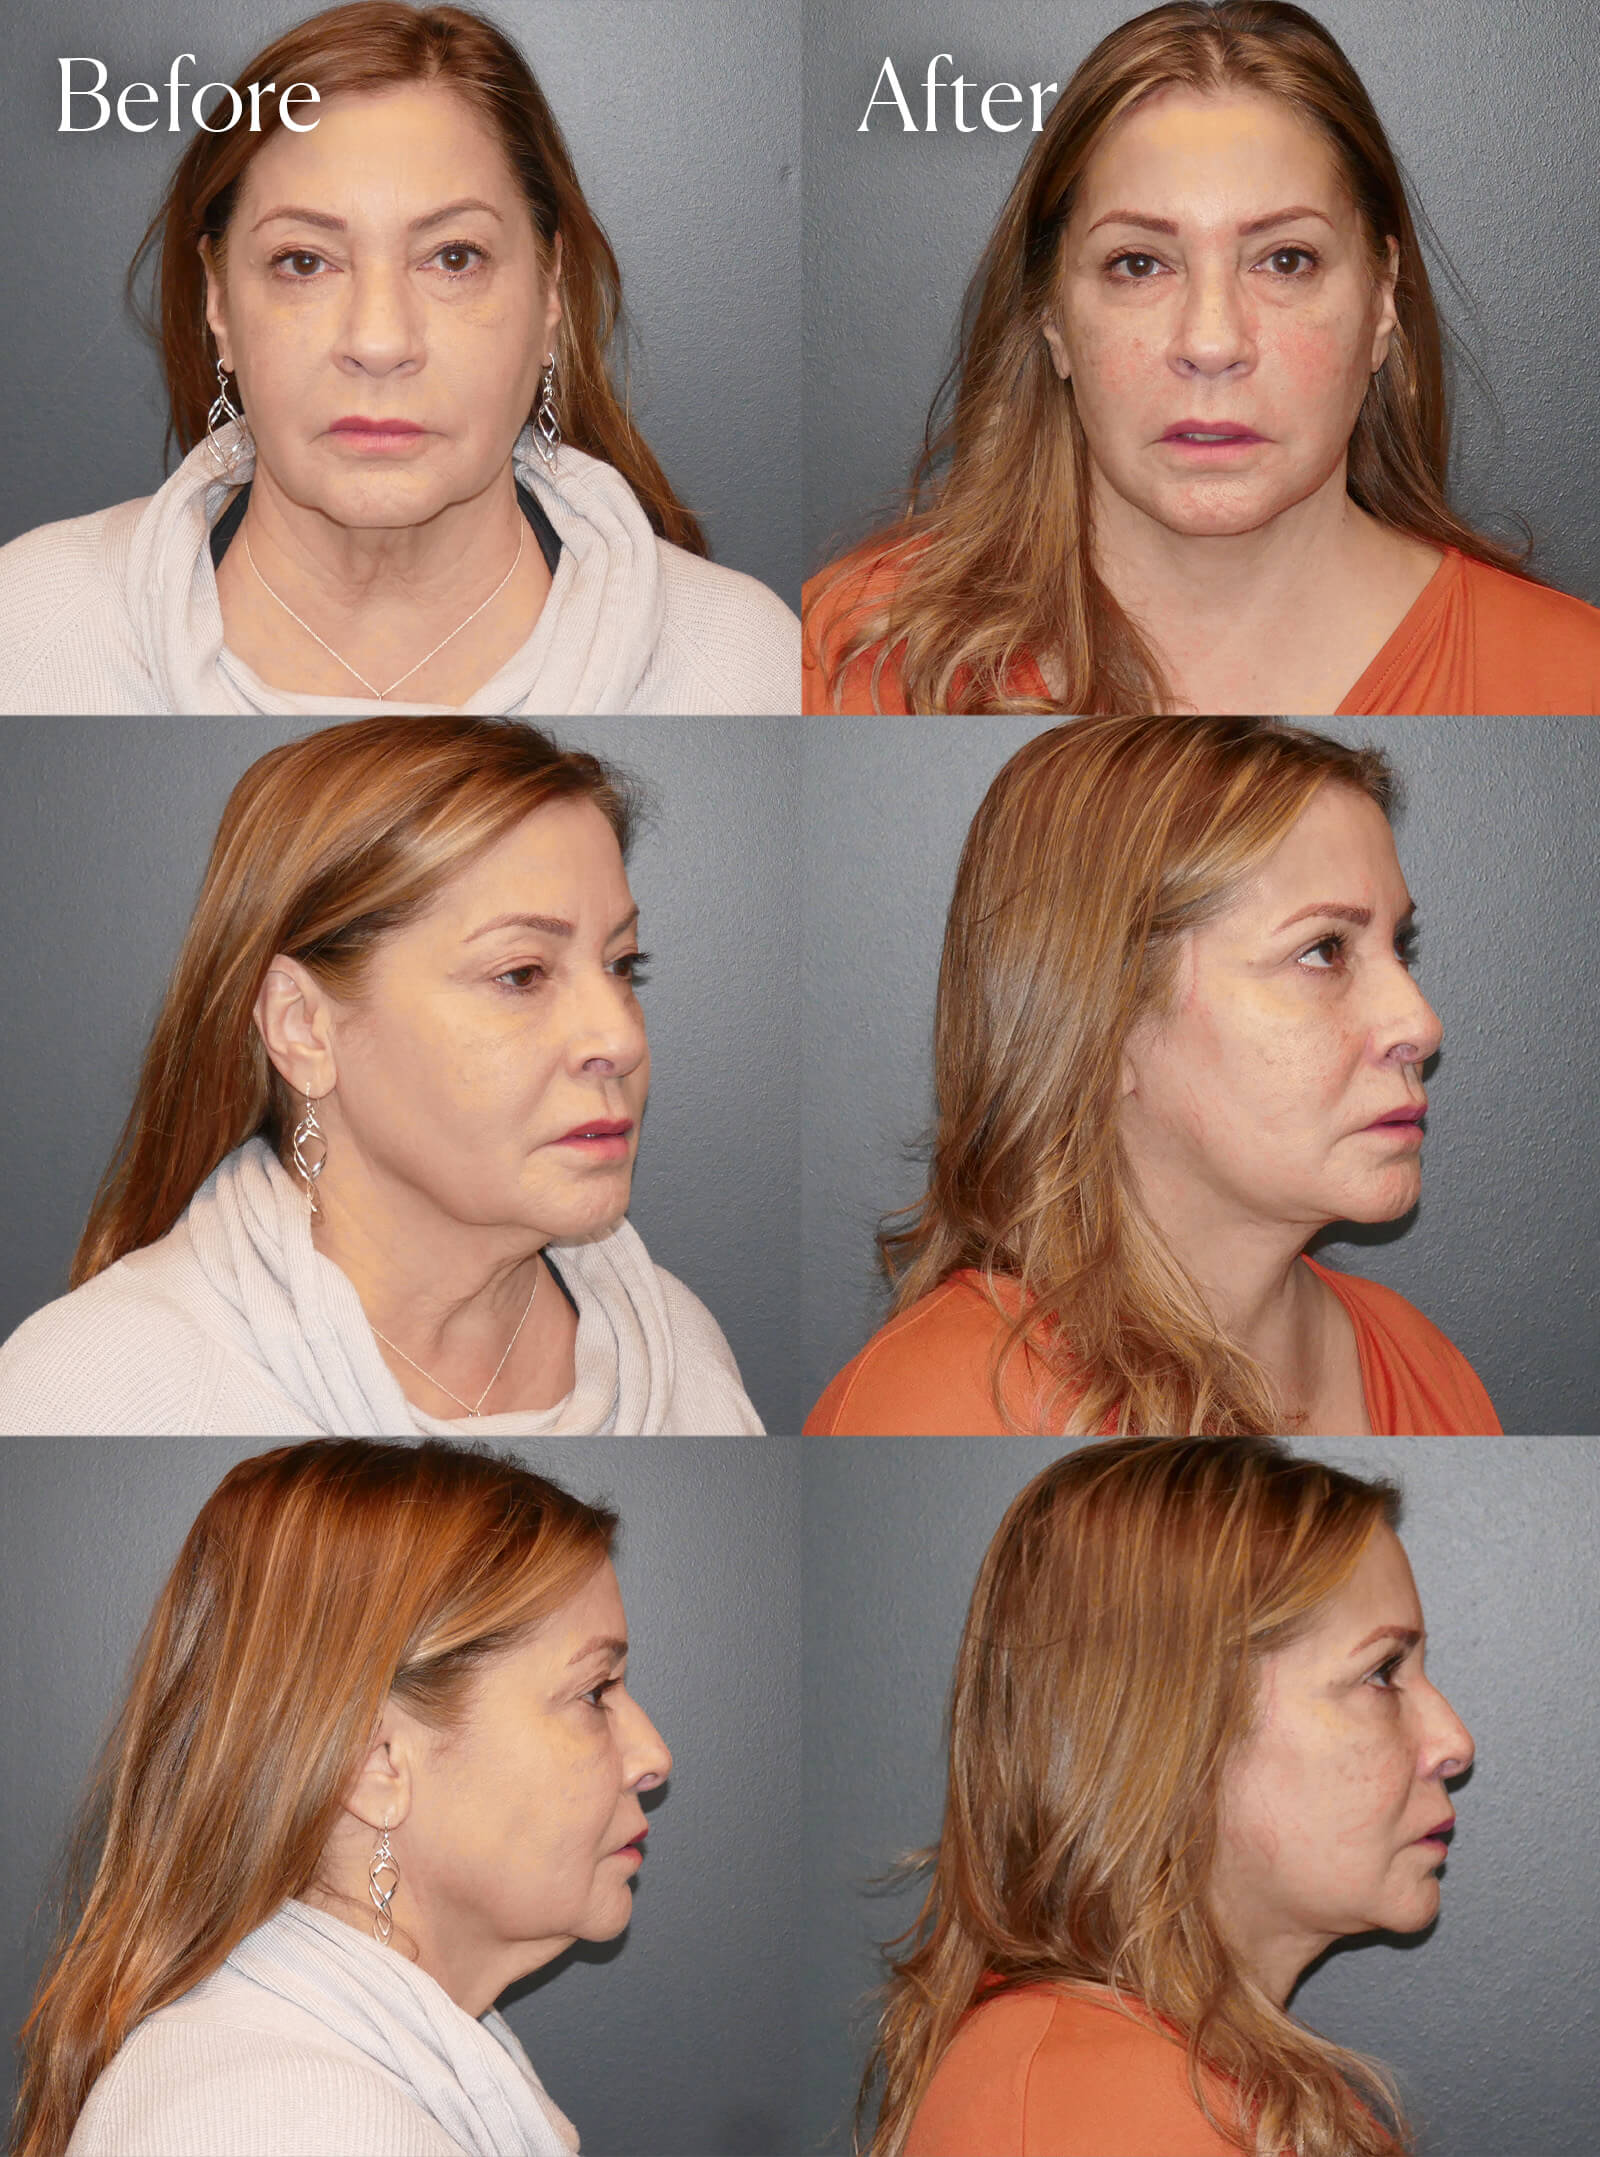 ultralift facelift surgery results